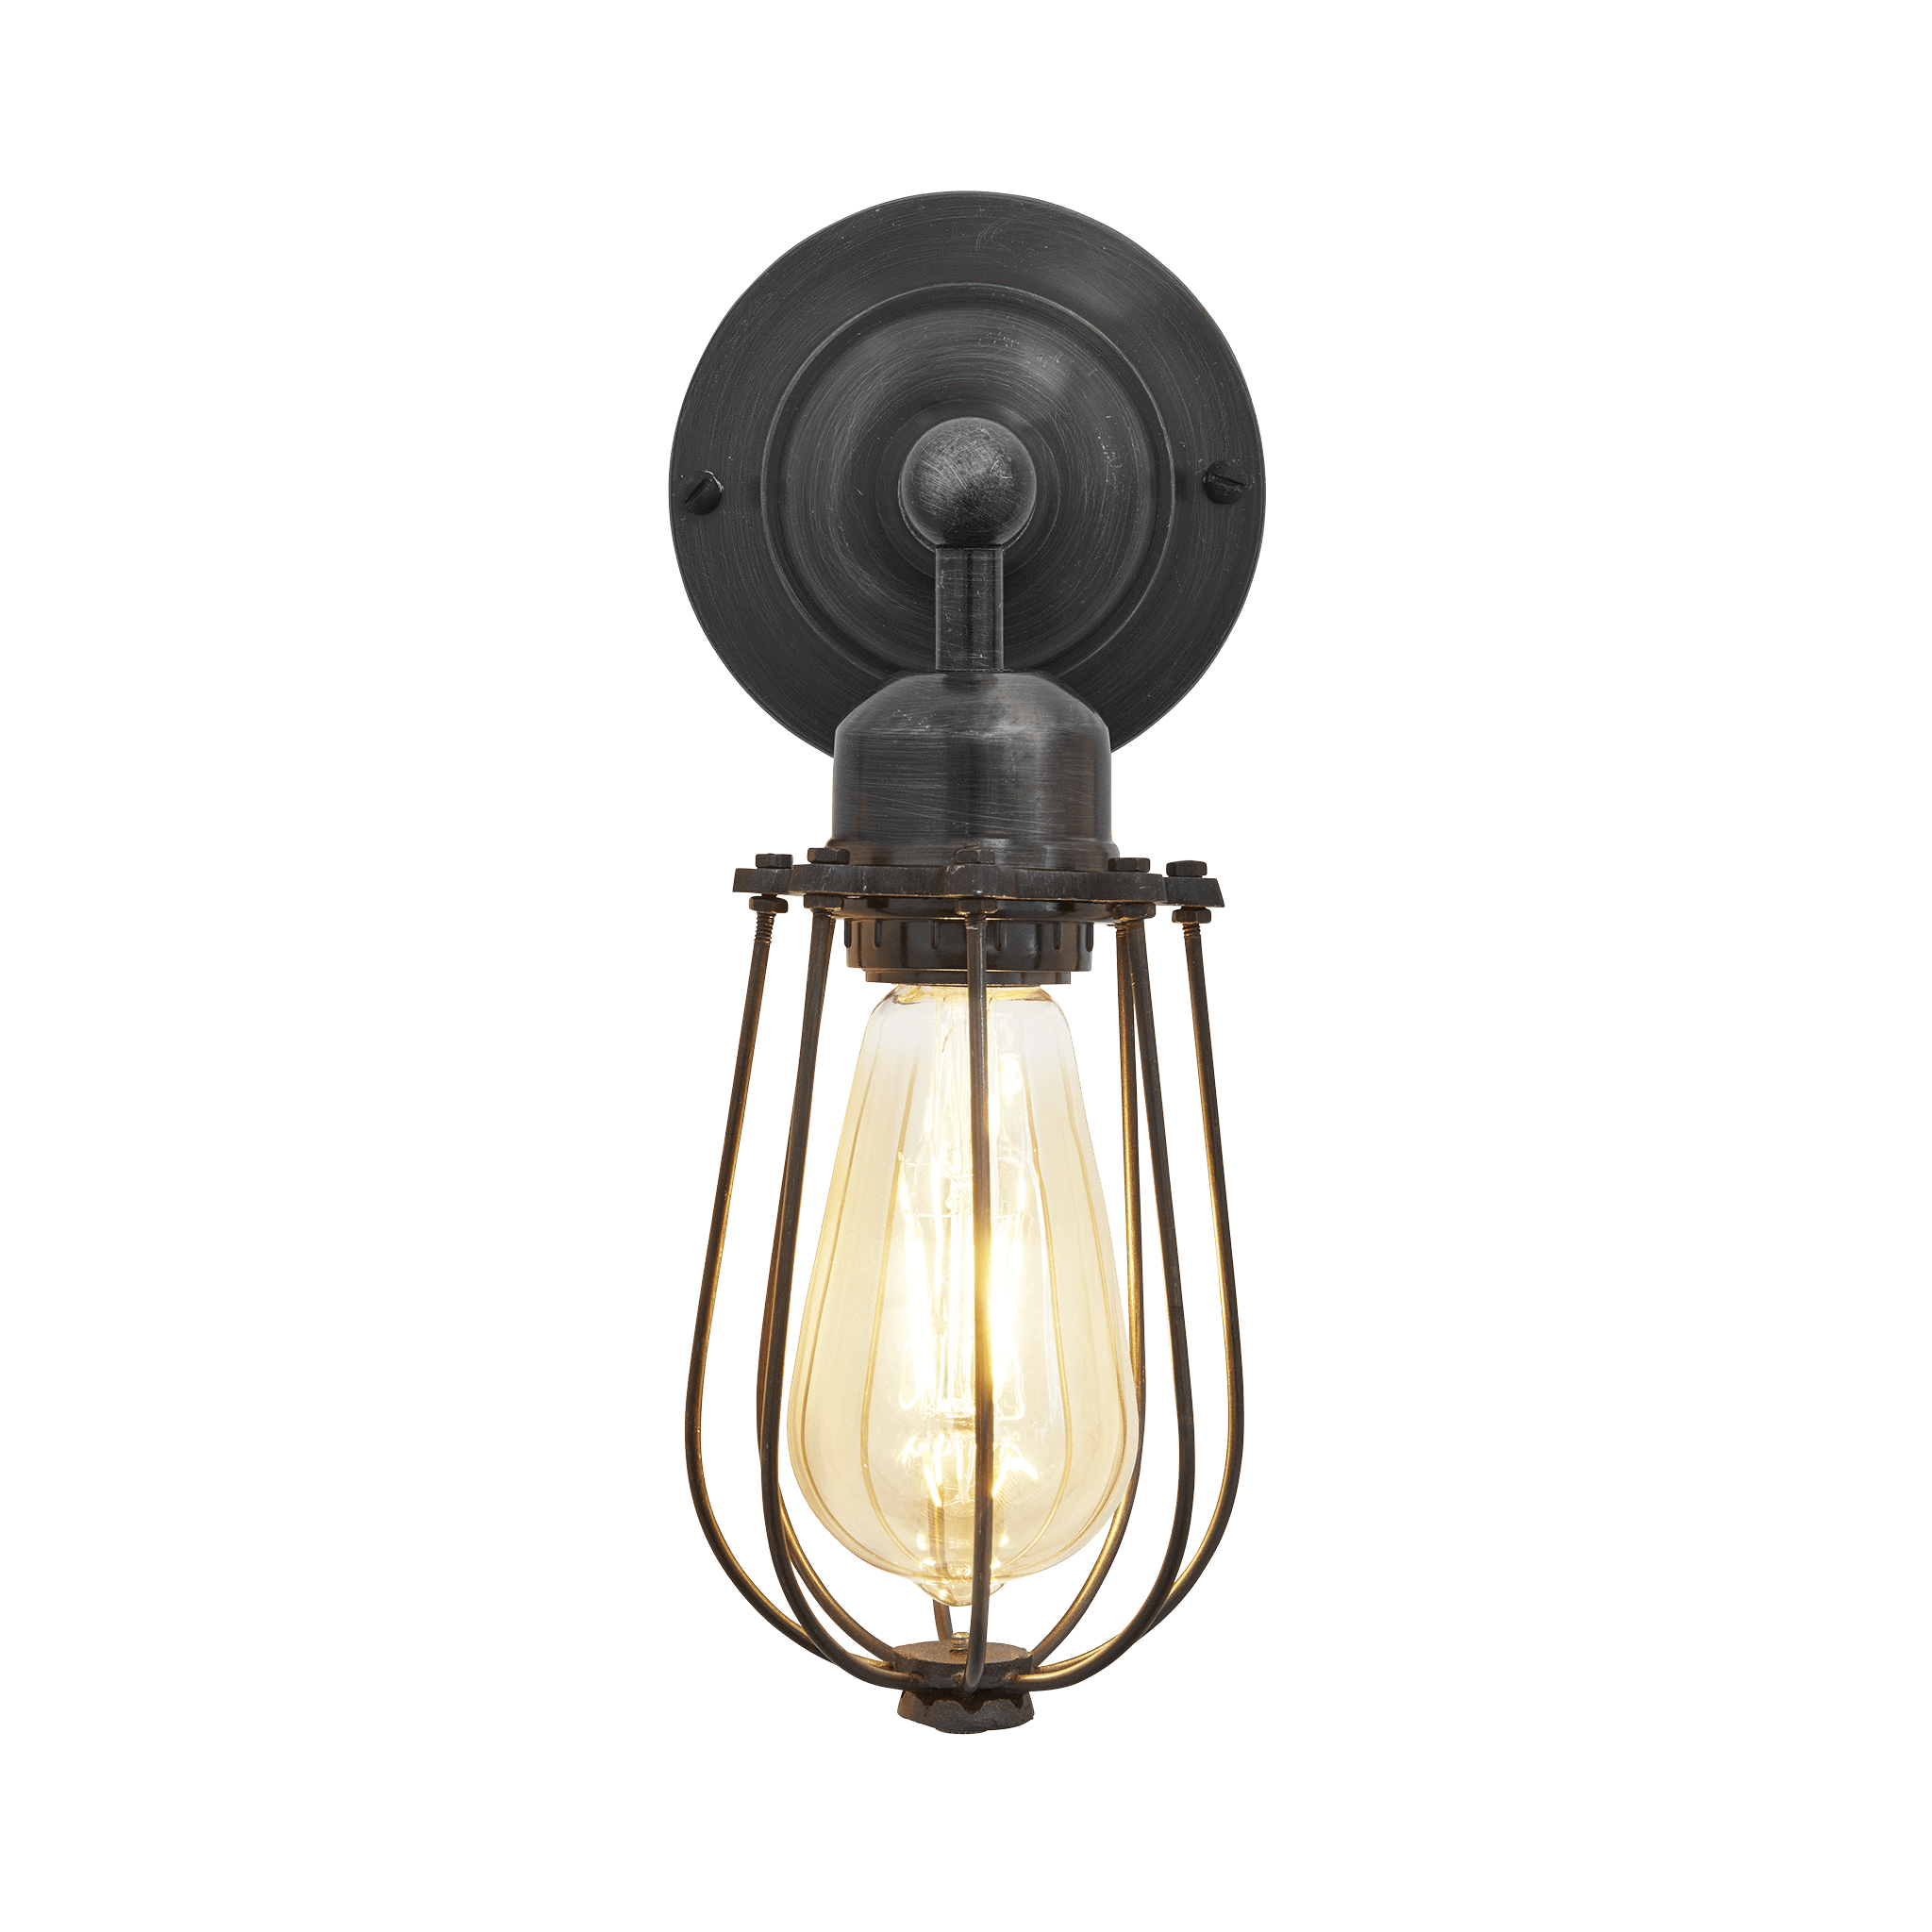 Industville – Orlando Wire Cage – 4 Inch – Wall Light Fixture – Black / Grey Colour – Pewter / Brass Material – 31 CM X 10 CM X 15 CM